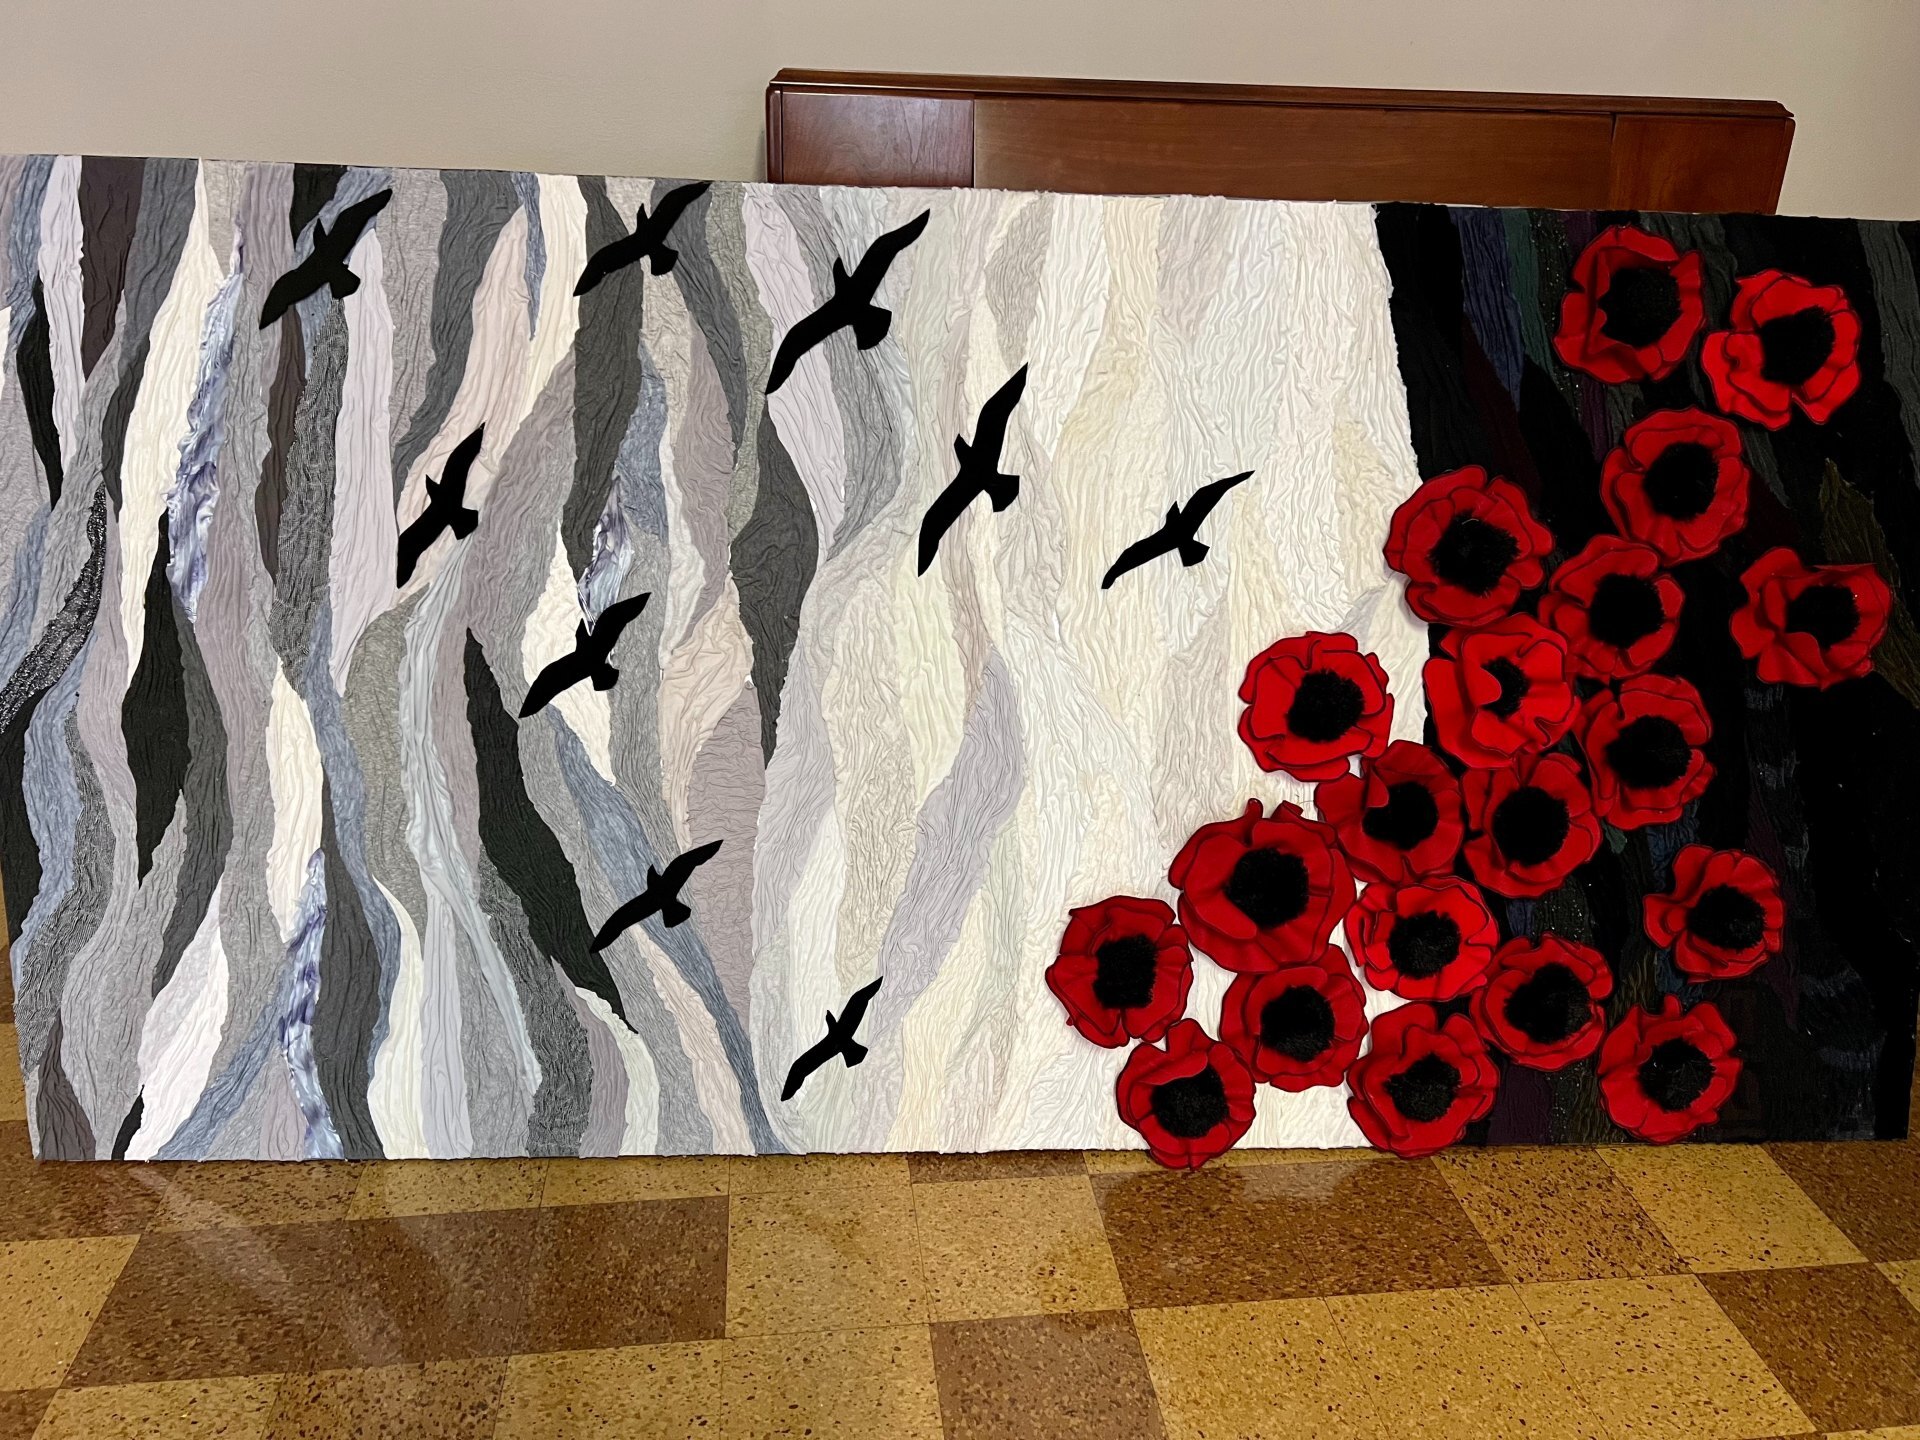 Poppy Mural, desaturated grey blue and black colours with bright red poppies